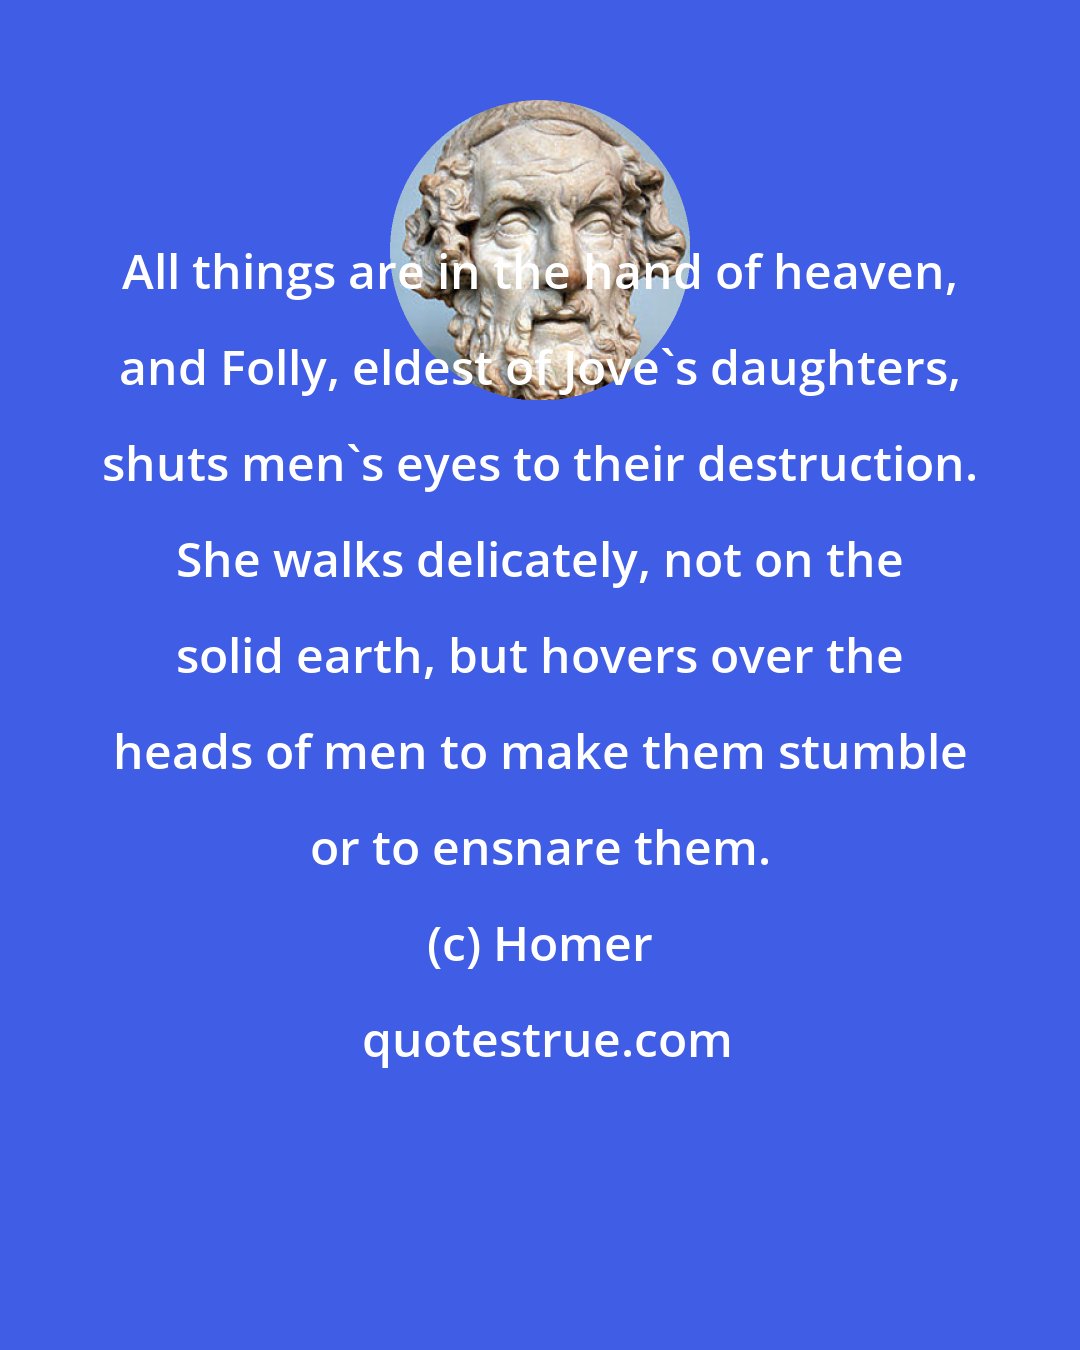 Homer: All things are in the hand of heaven, and Folly, eldest of Jove's daughters, shuts men's eyes to their destruction. She walks delicately, not on the solid earth, but hovers over the heads of men to make them stumble or to ensnare them.